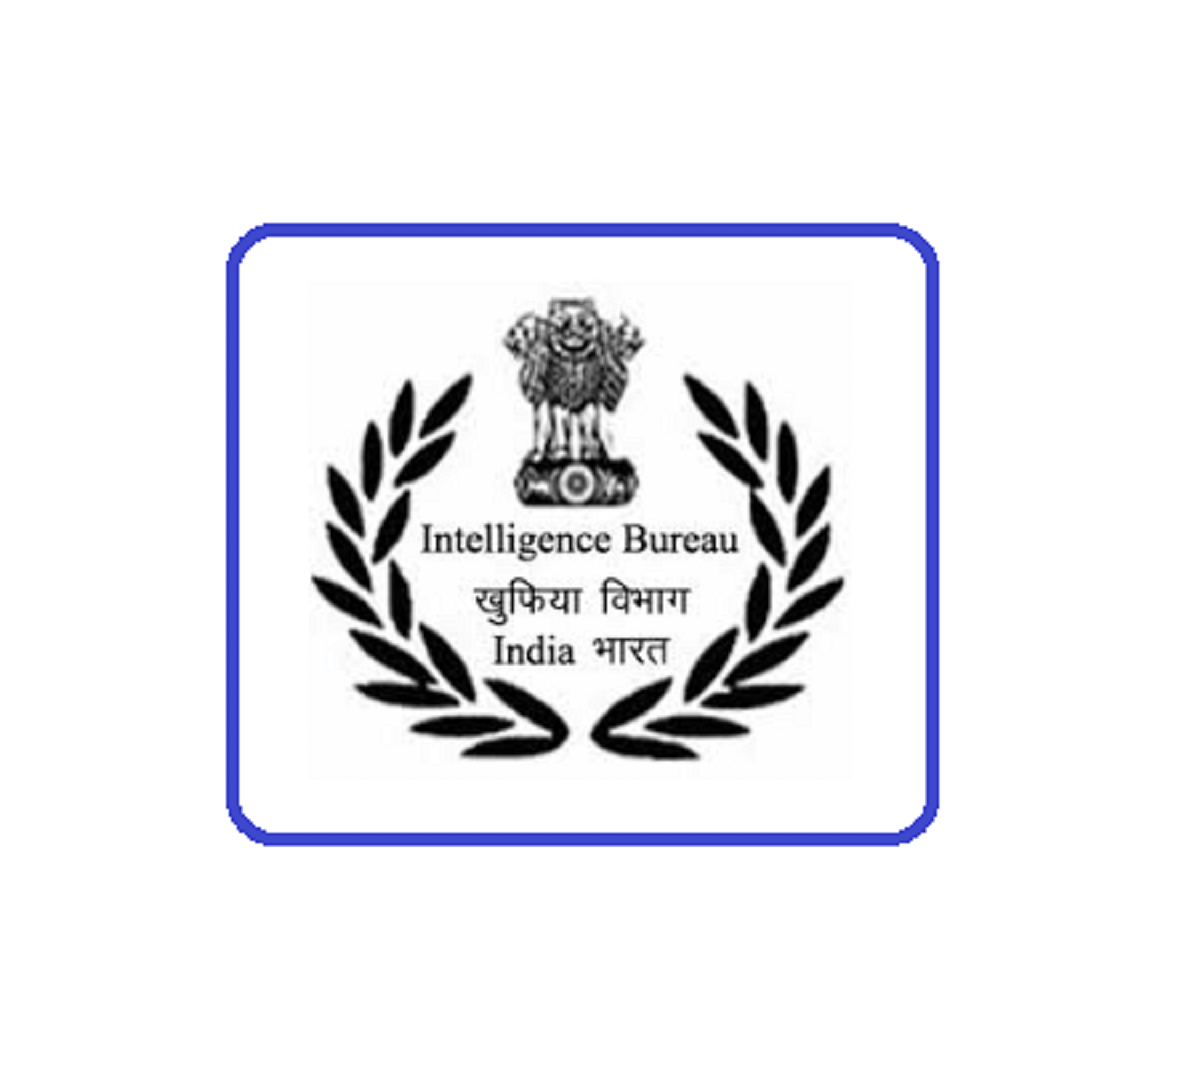 IB Security Assistant Interview Admit Card 2019 Released, Check Here